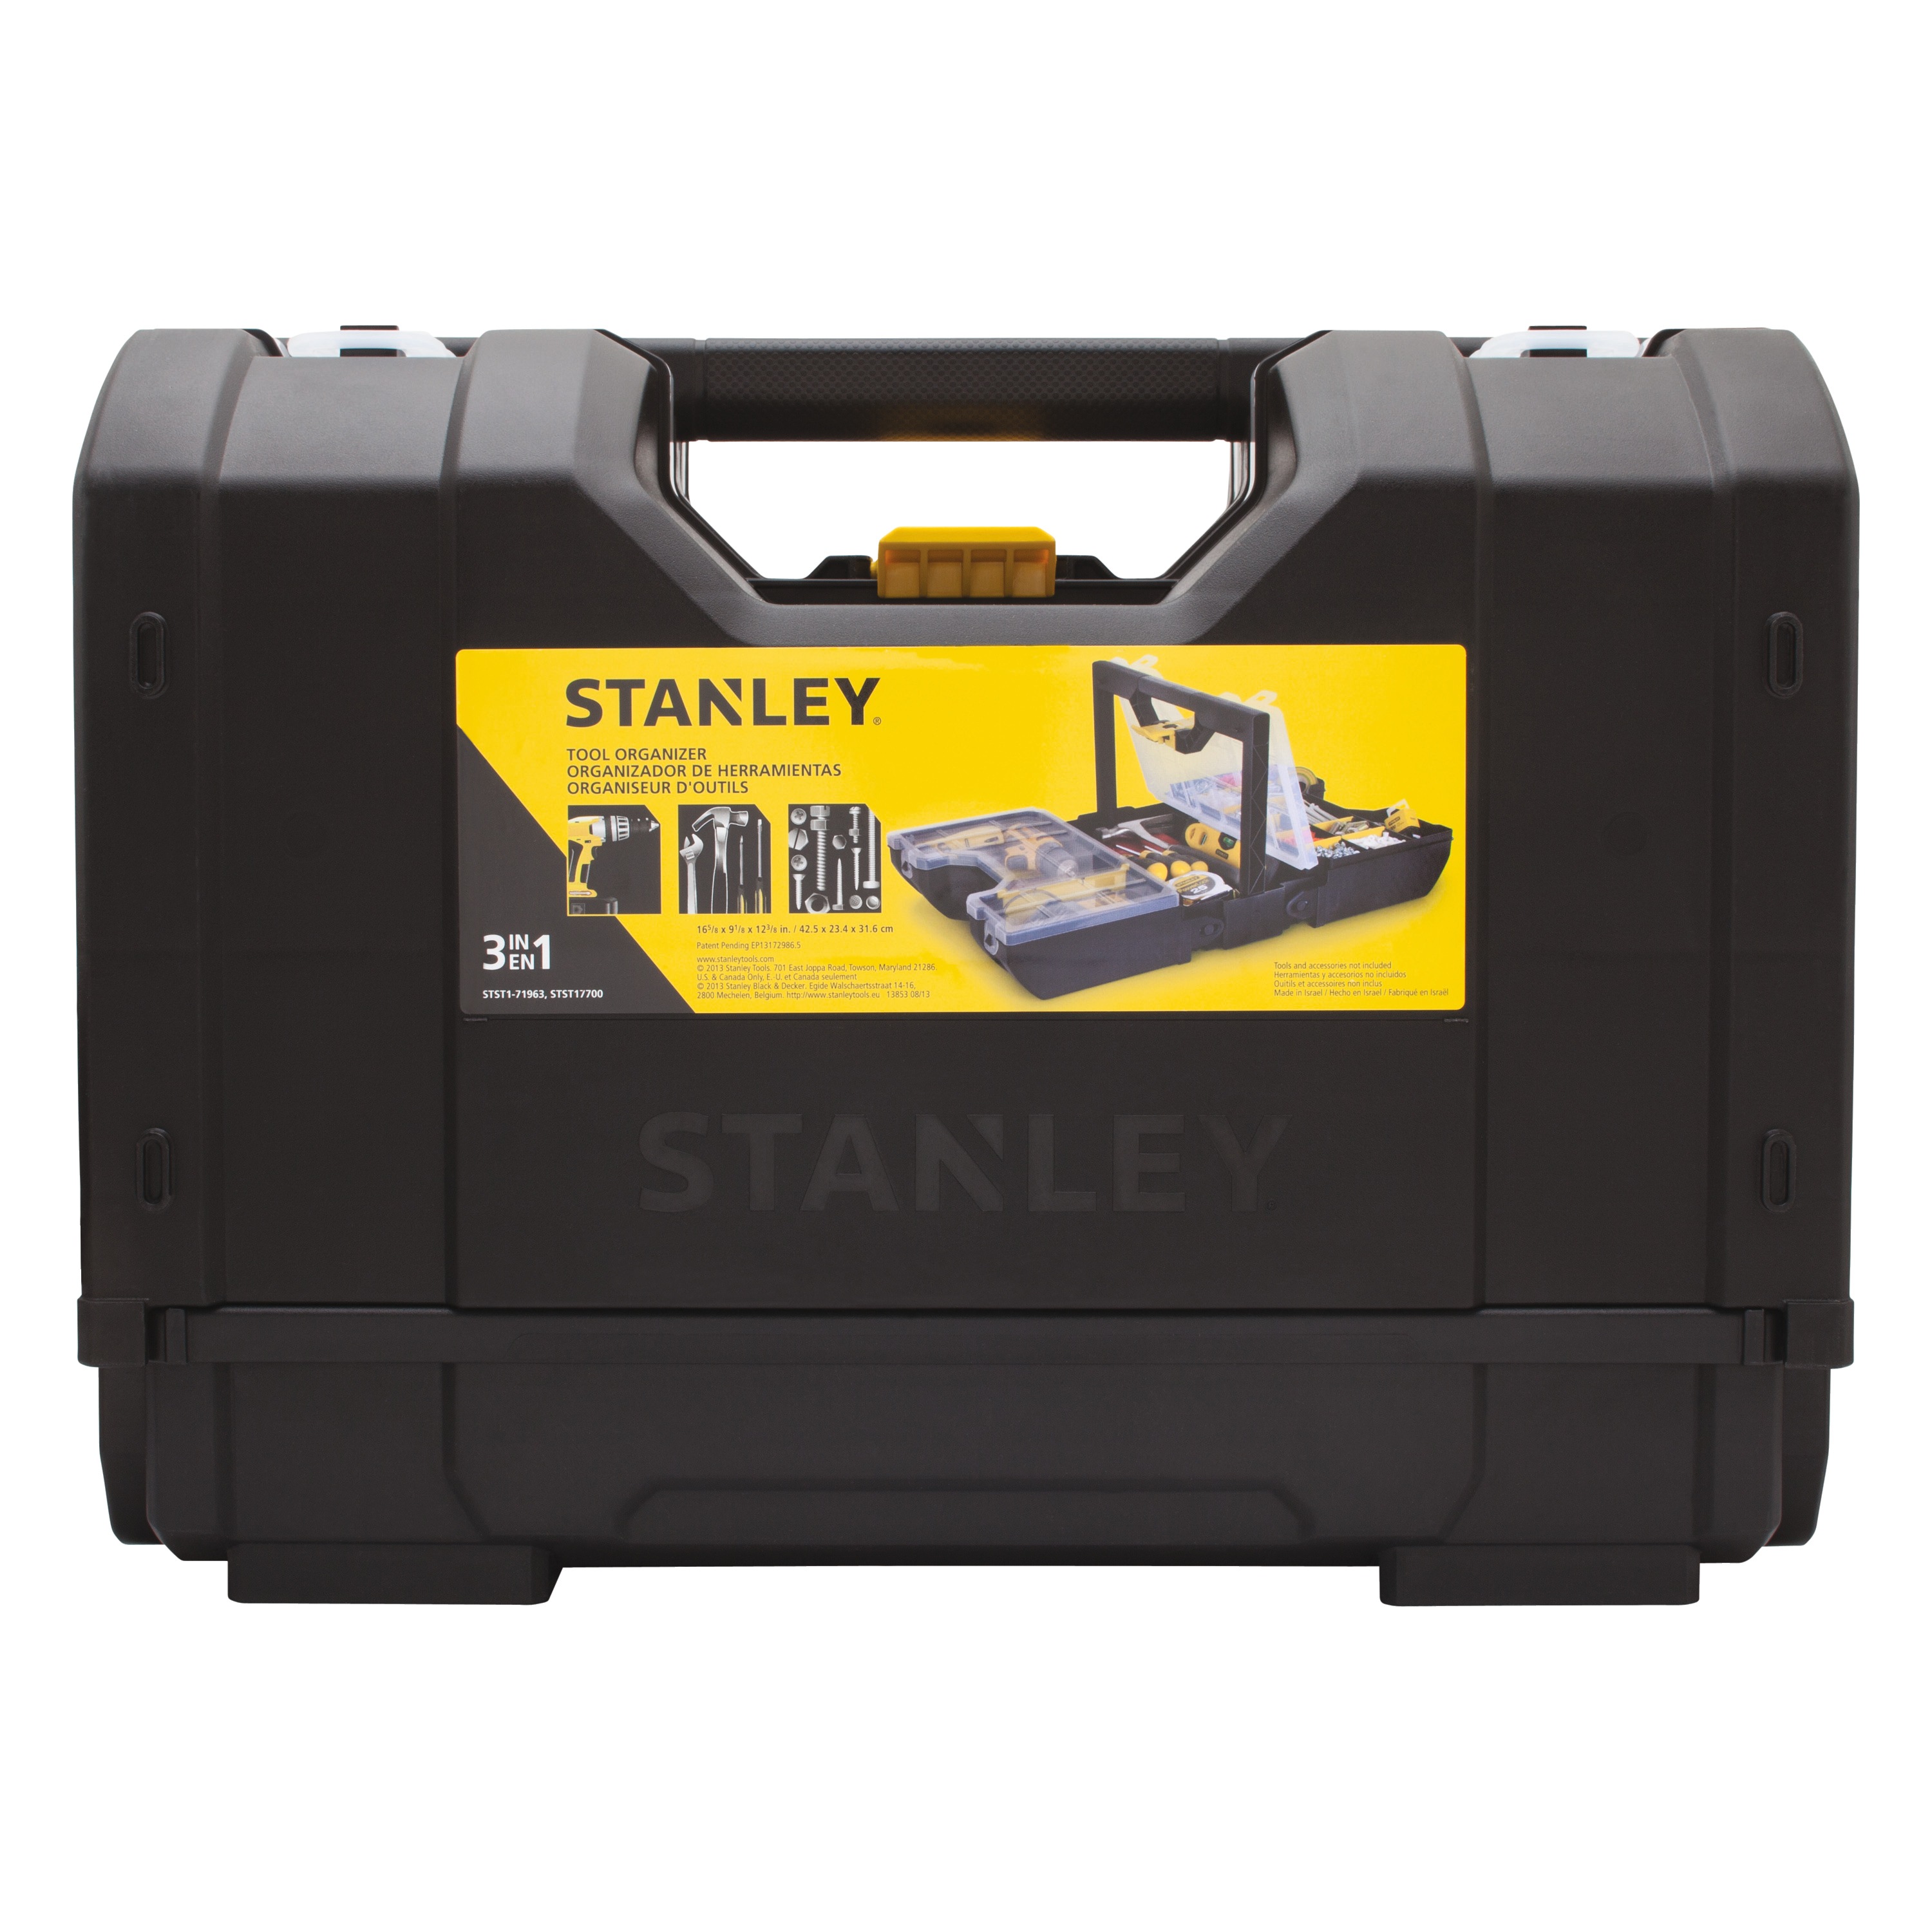 Stanley Tools - 3in1 Tool Organizer - STST17700